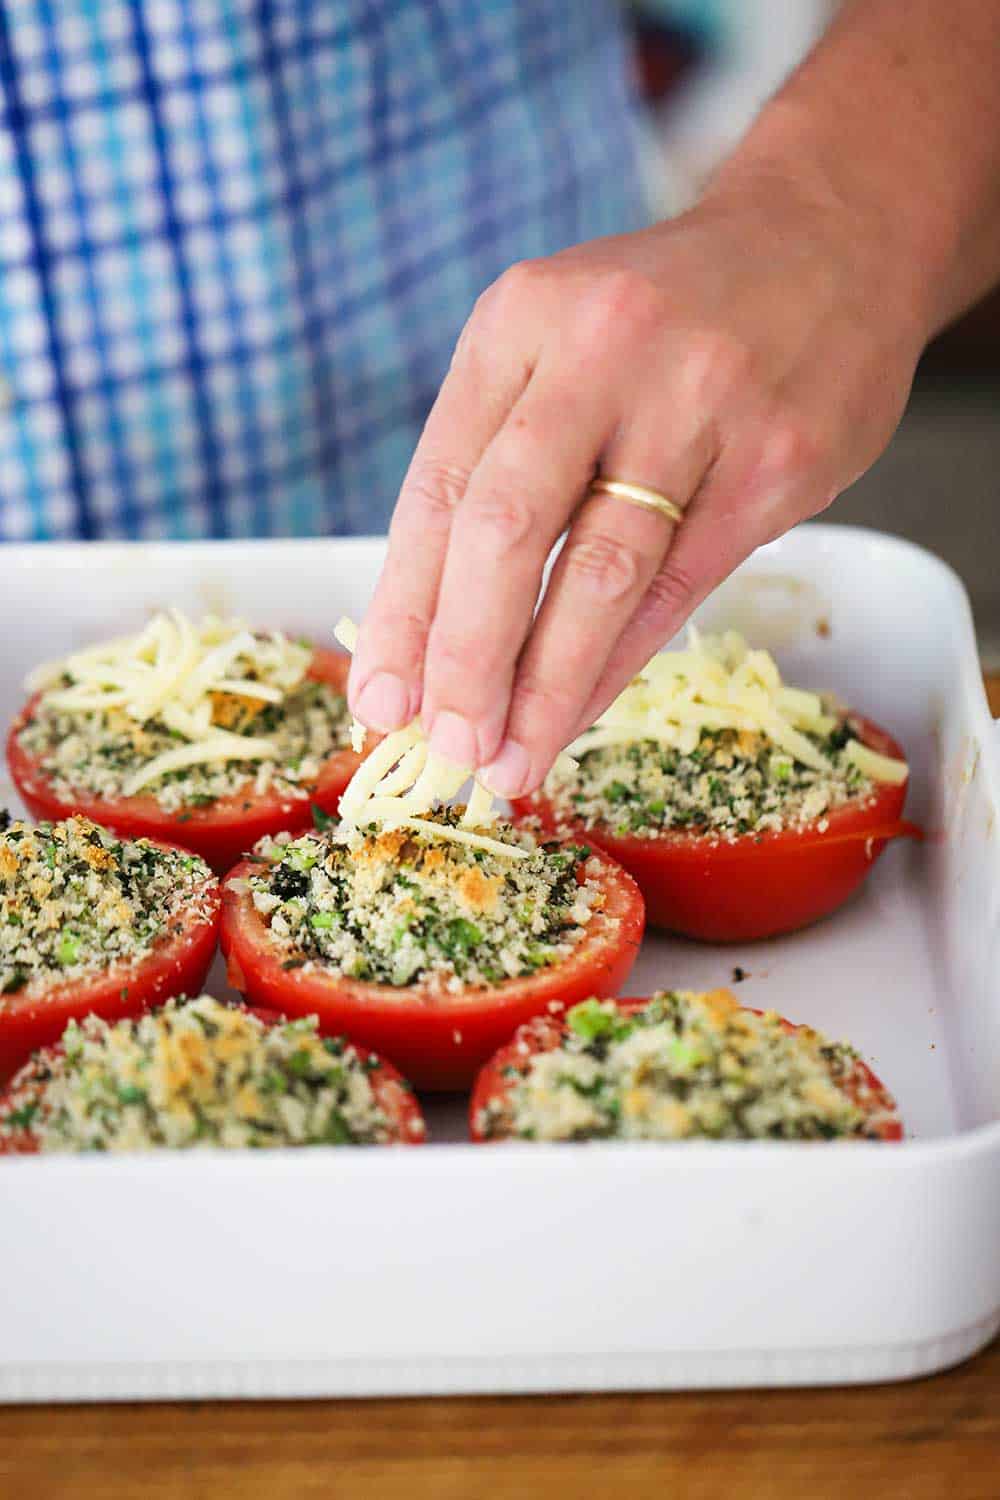 A hand sprinkling shredded cheese over roasted halved stuffed tomatoes in a white baking dish.